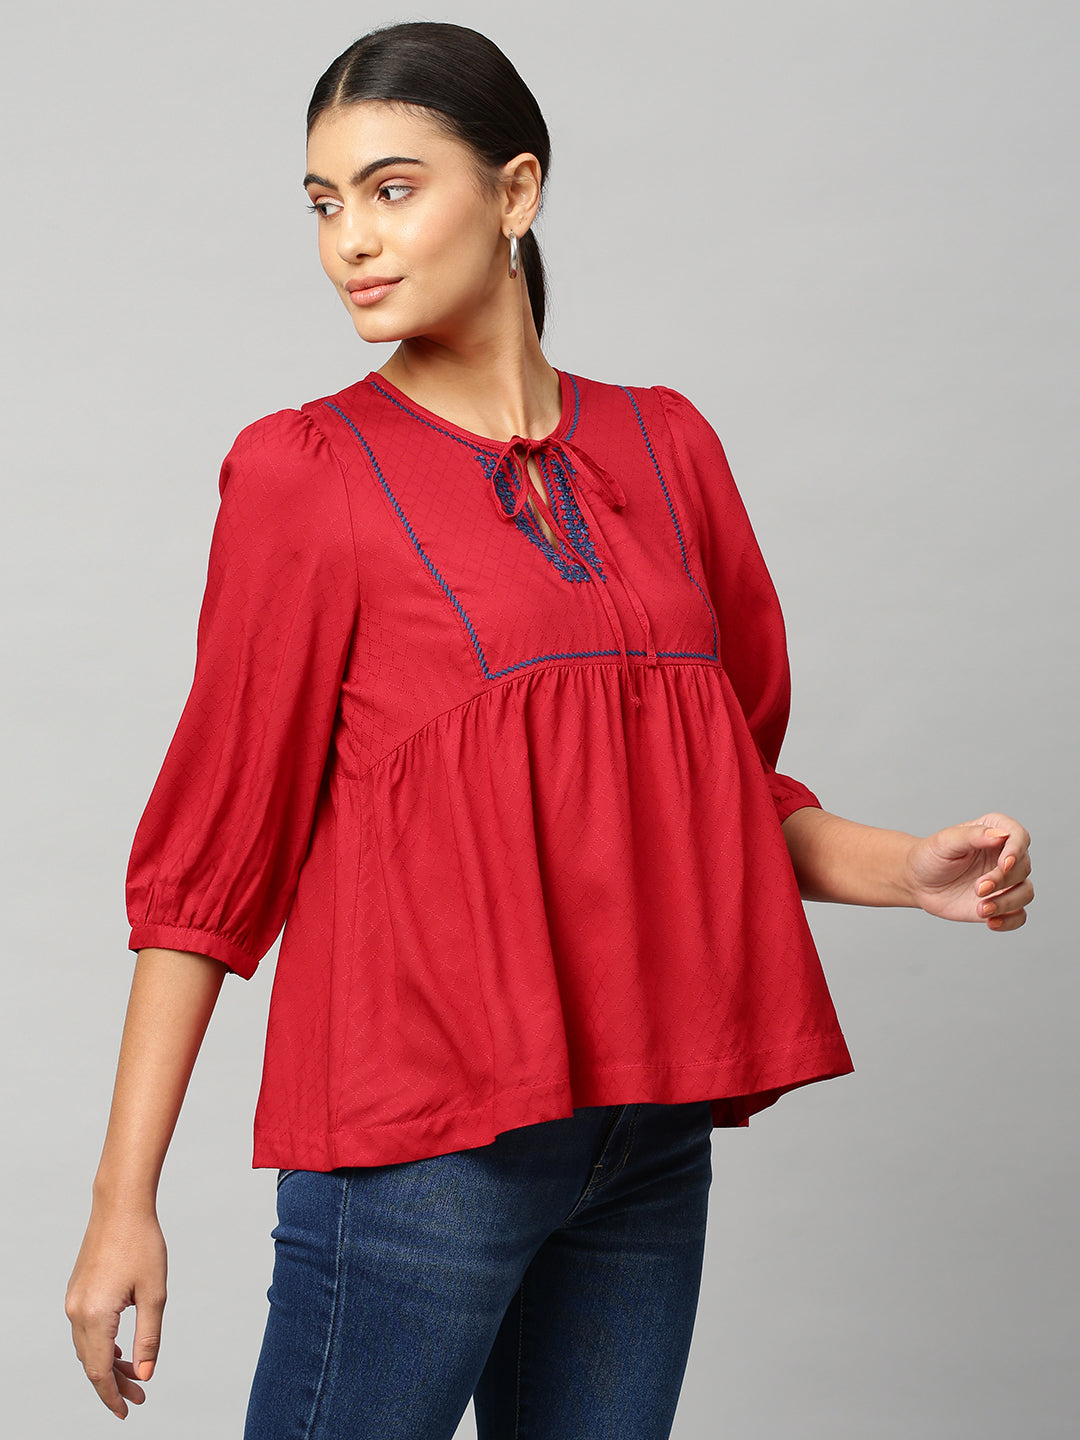 Buy Now Chemistry Embroidered Viscose Dobby Top